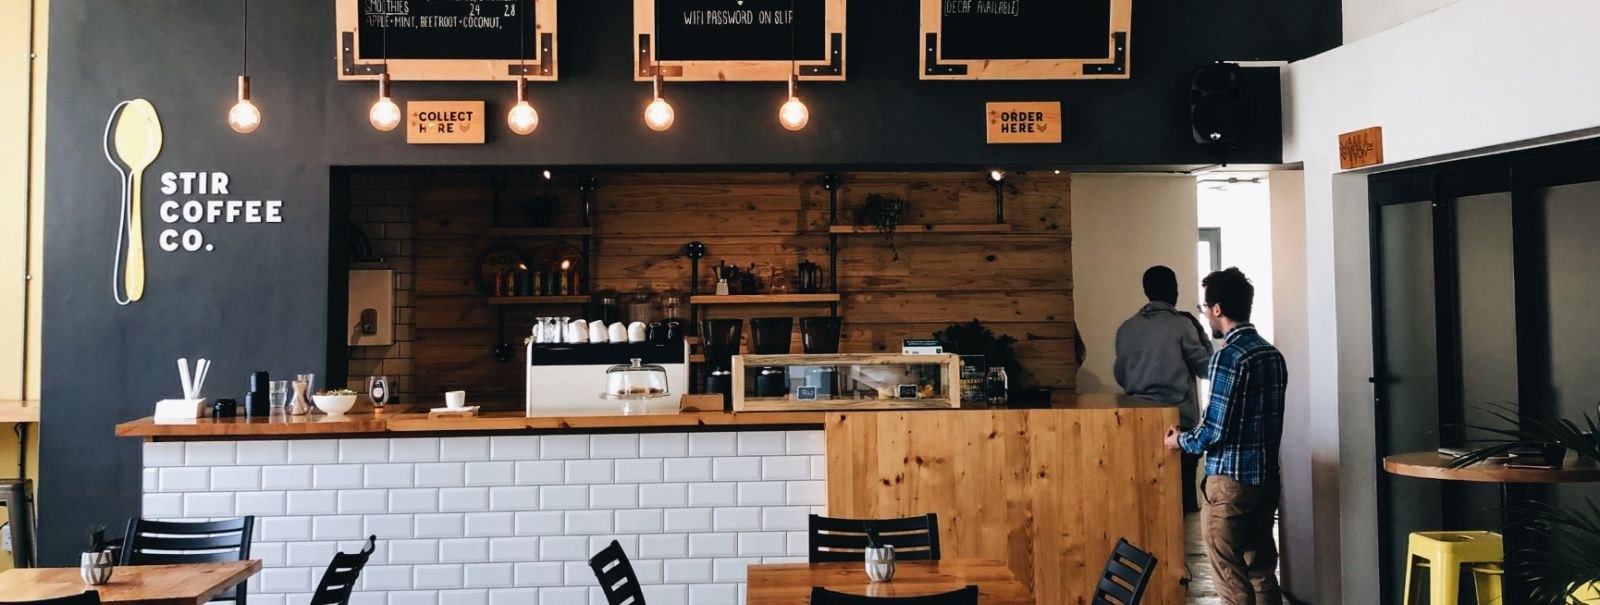 Before diving into the vast sea of coffee machines, it's crucial to understand your customers' preferences. Are they seeking artisan espressos, or do they prefe